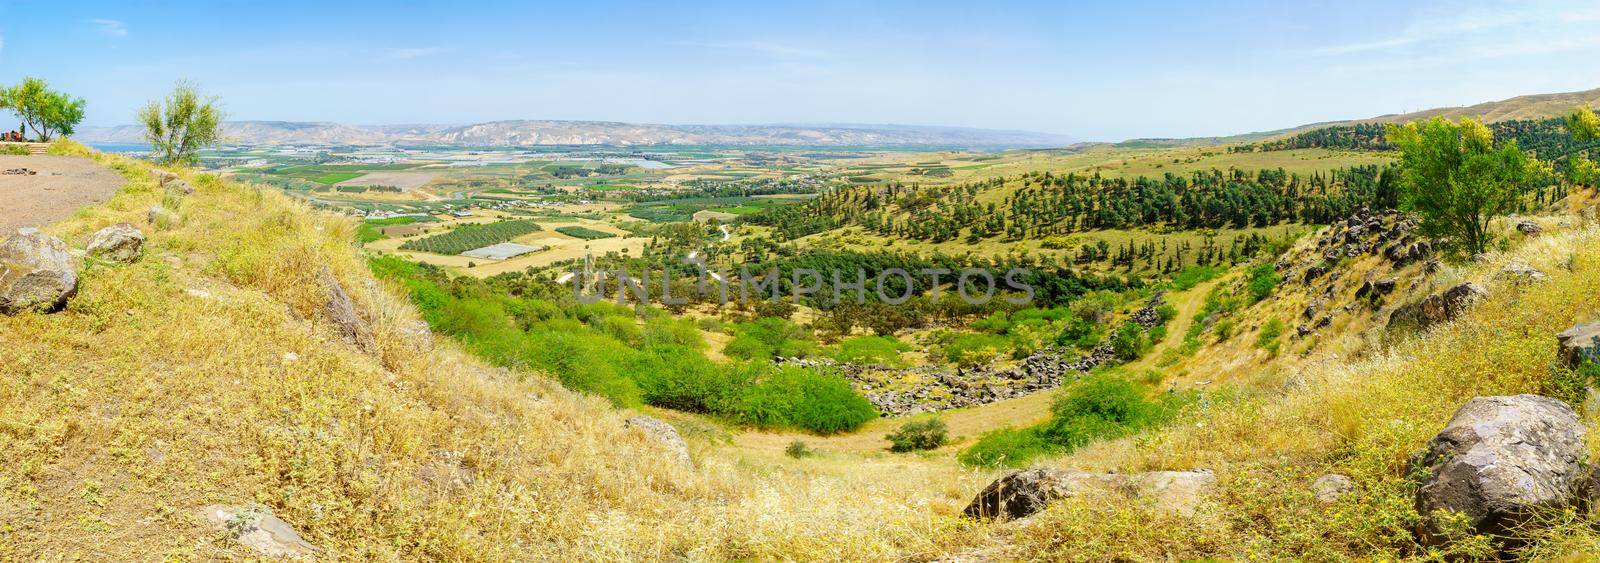 Panoramic landscape of the Lower Jordan River valley by RnDmS